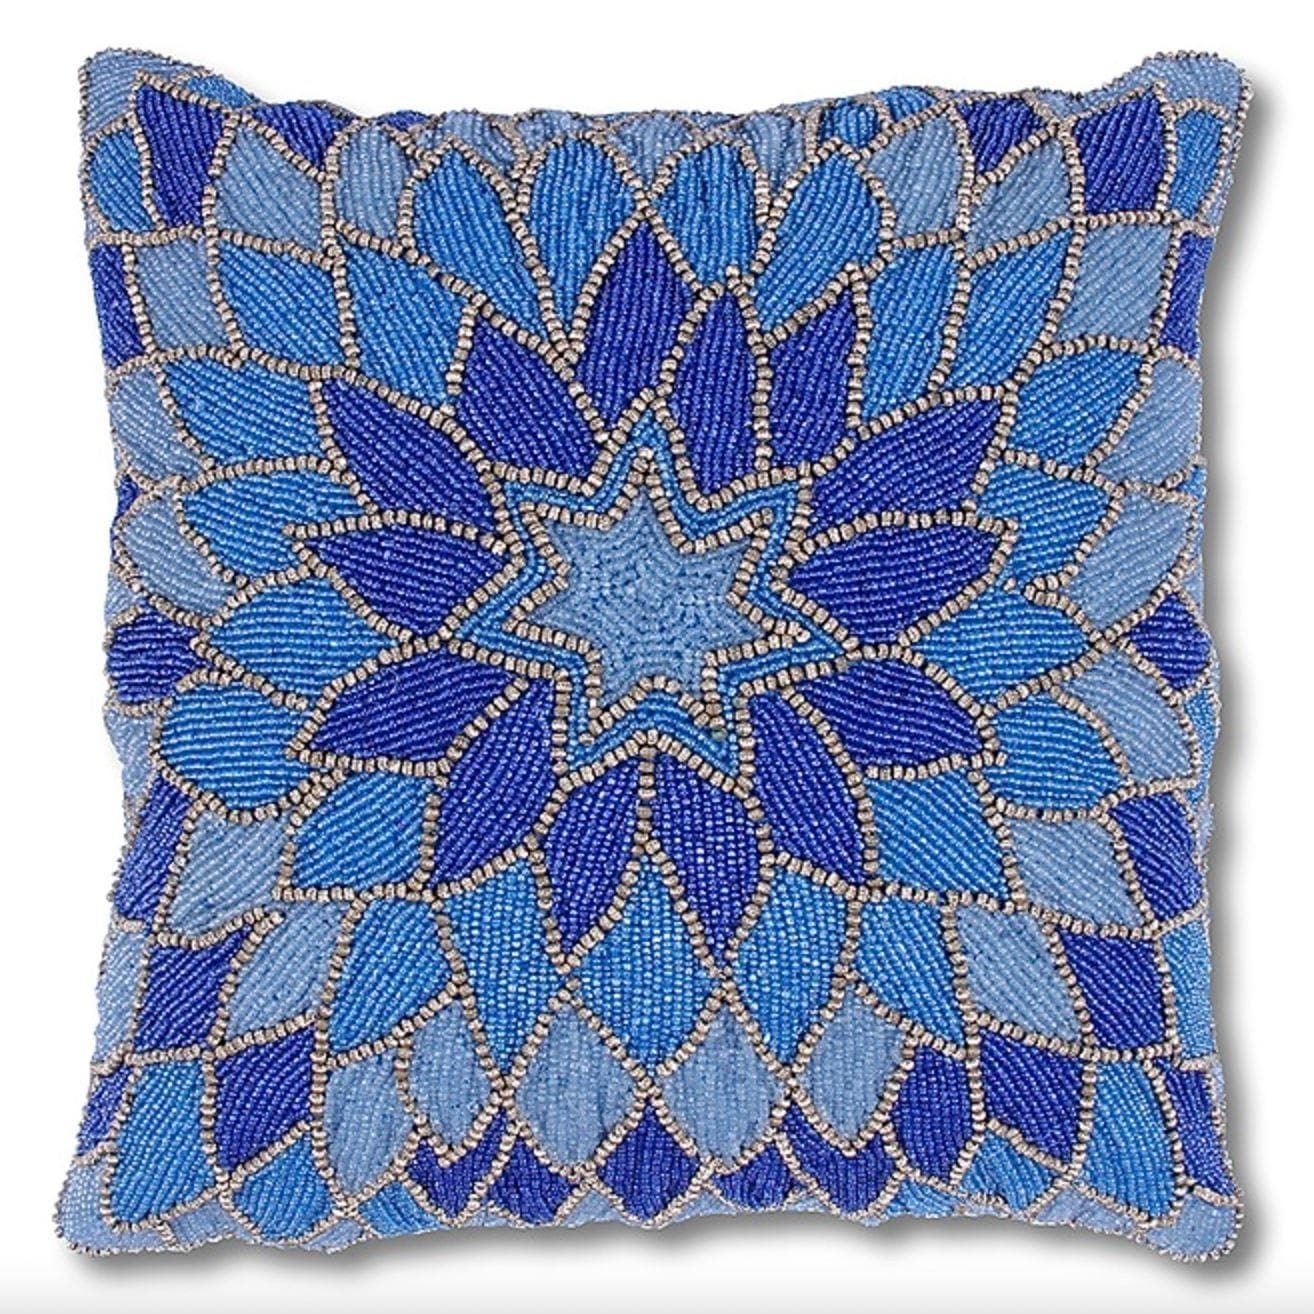 Blue Sunflower Embroidered Canvas Cotton Cushion Covers - Pack of 2 - MAIA HOMES